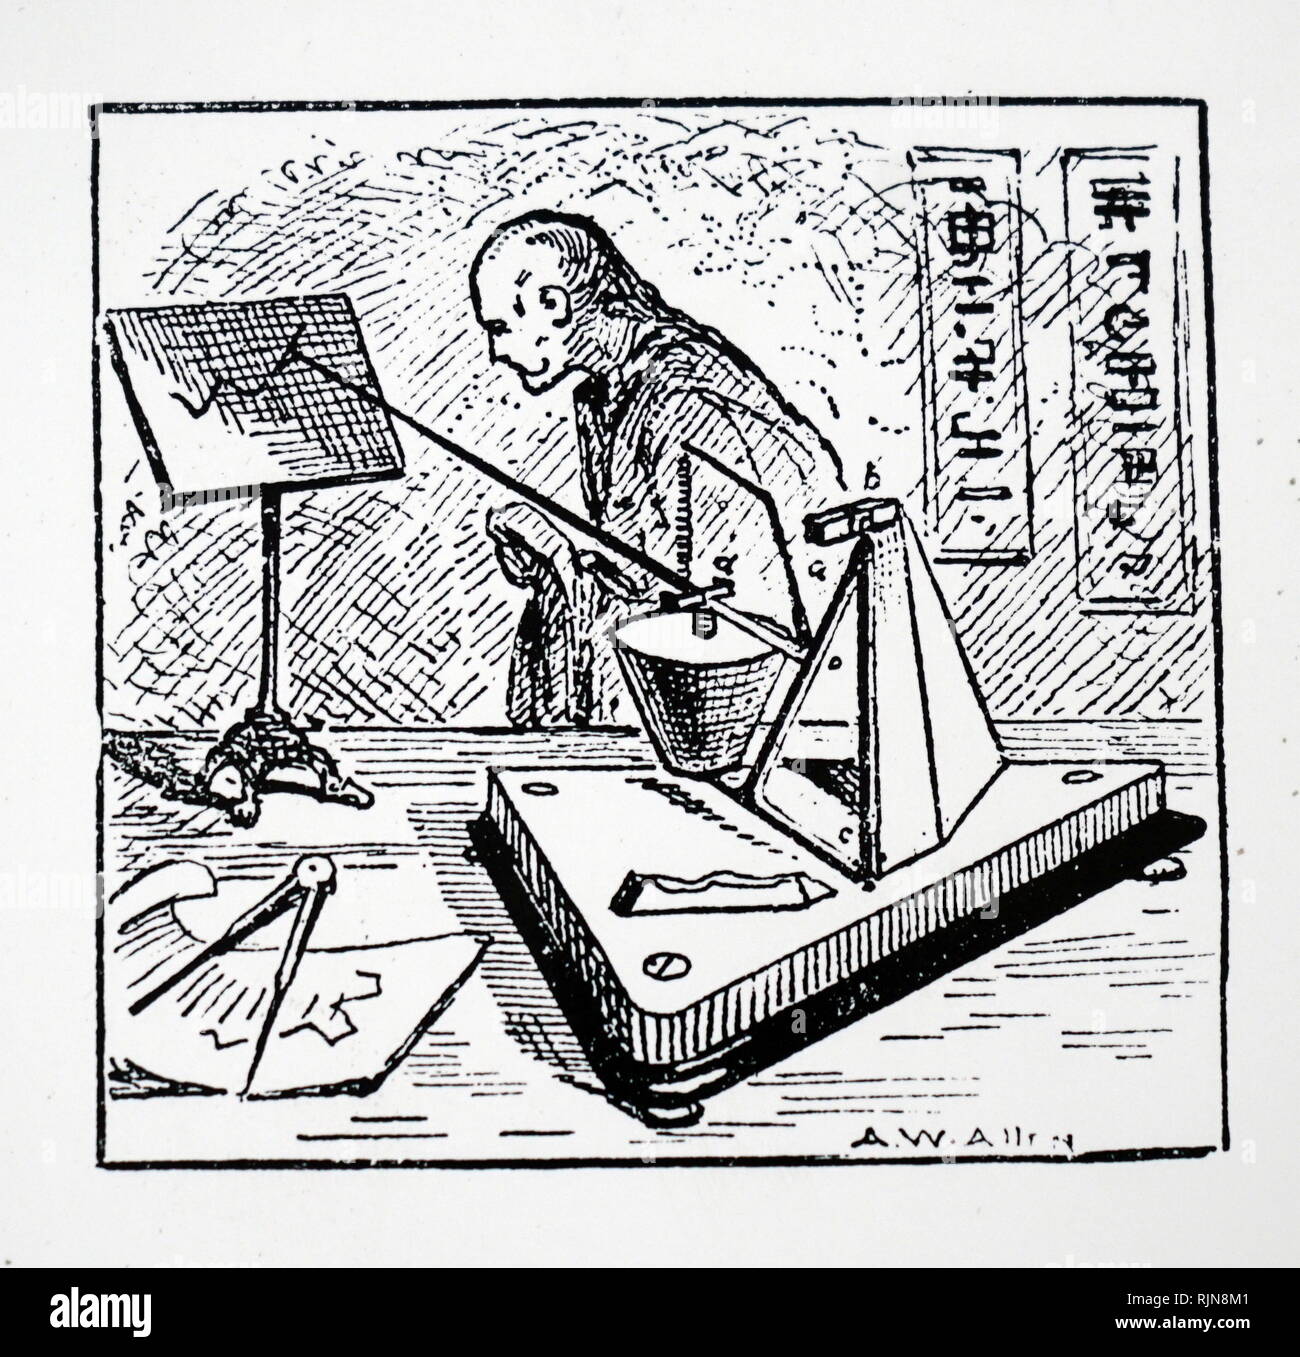 An engraving depicting J. A. Ewing's earthquake recorder. This device was used for measuring earthquake shocks in Japan. Dated 19th century Stock Photo